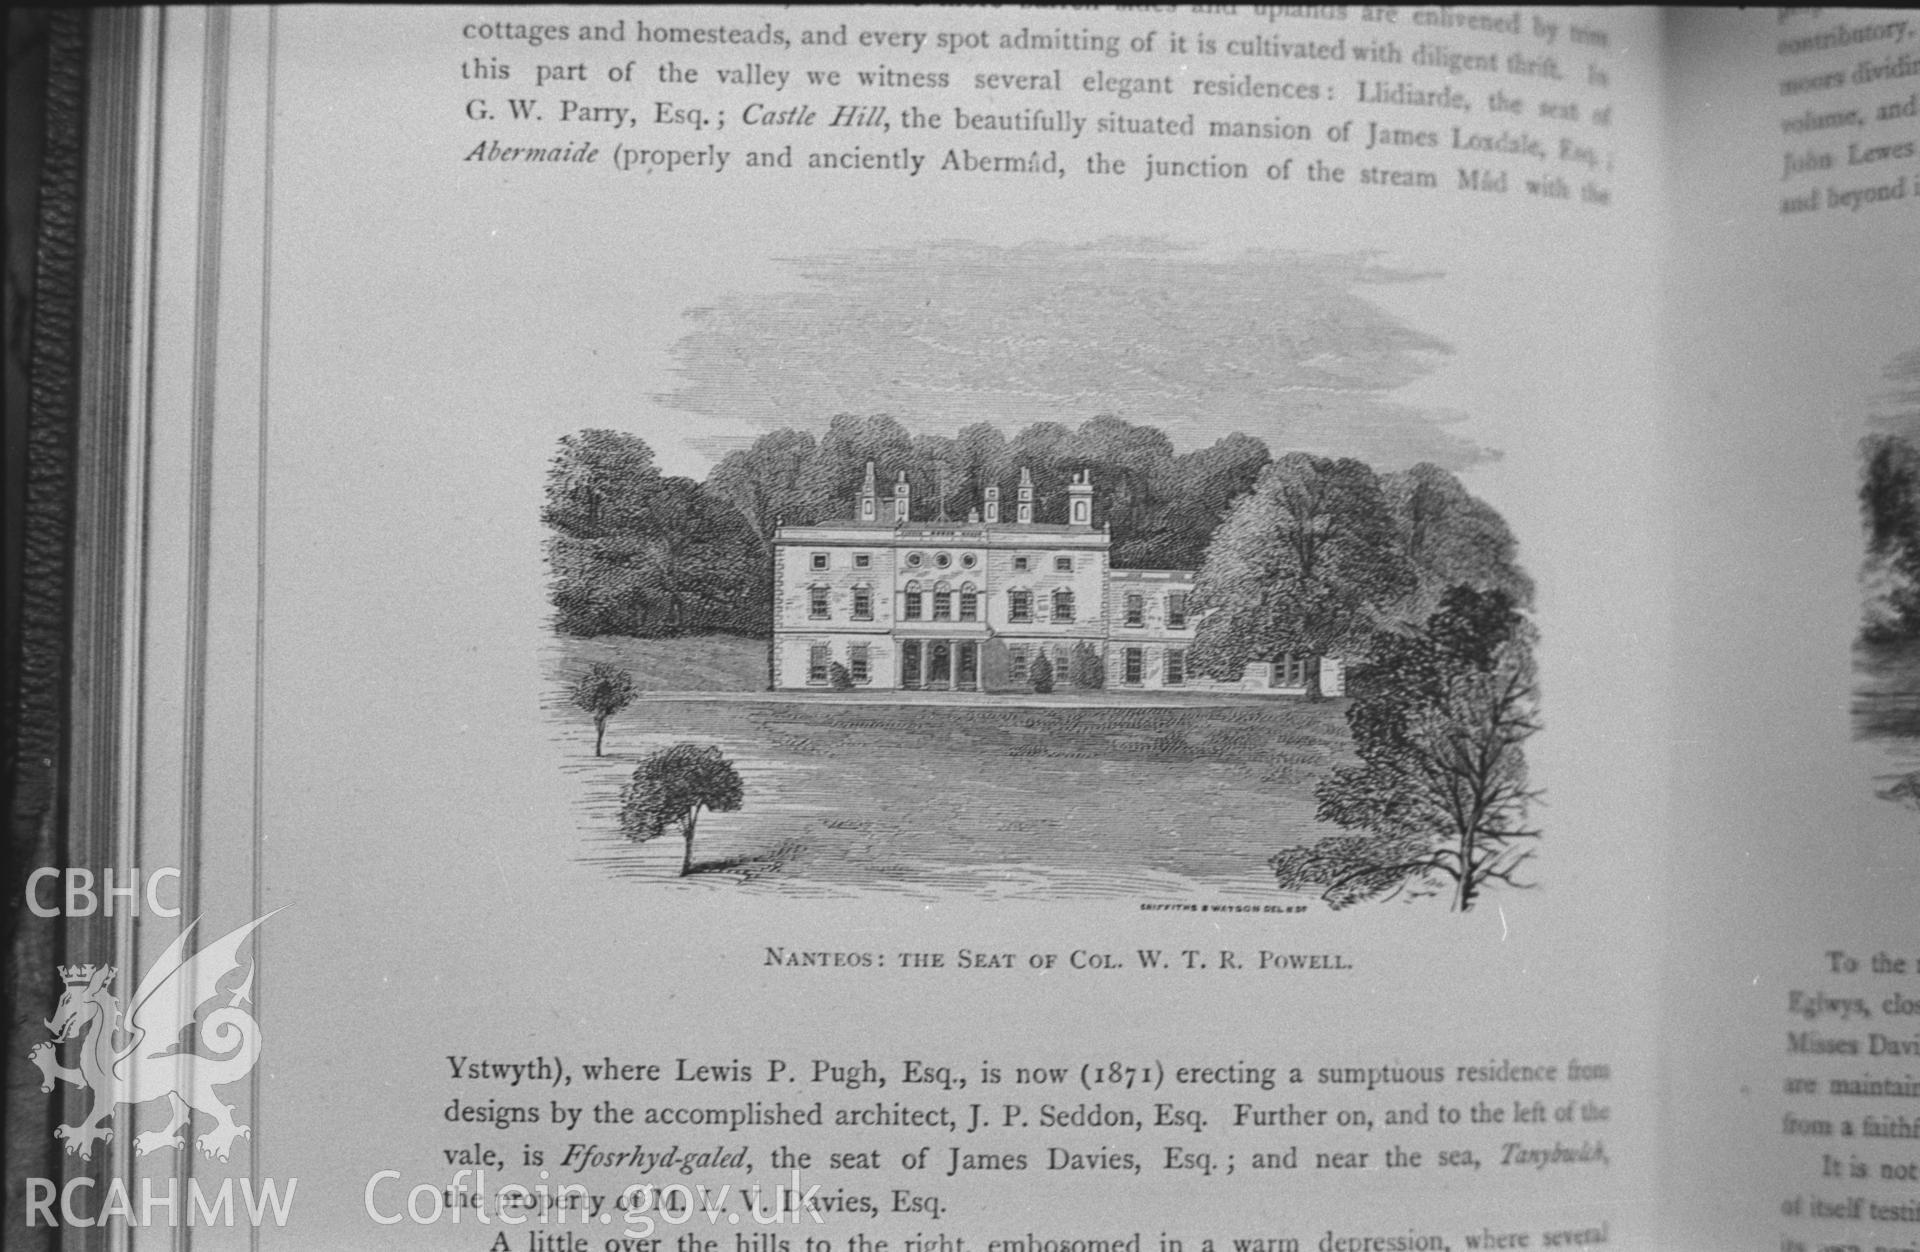 Drawing entitled 'Nanteos. The seat of Col. W. T. R. Powell.' From 'Annals of the counties and county families of Wales' vol 1 by Thomas Nicholas, 1872. Photographed by Arthur O. Chater in January 1968 for his own private research.